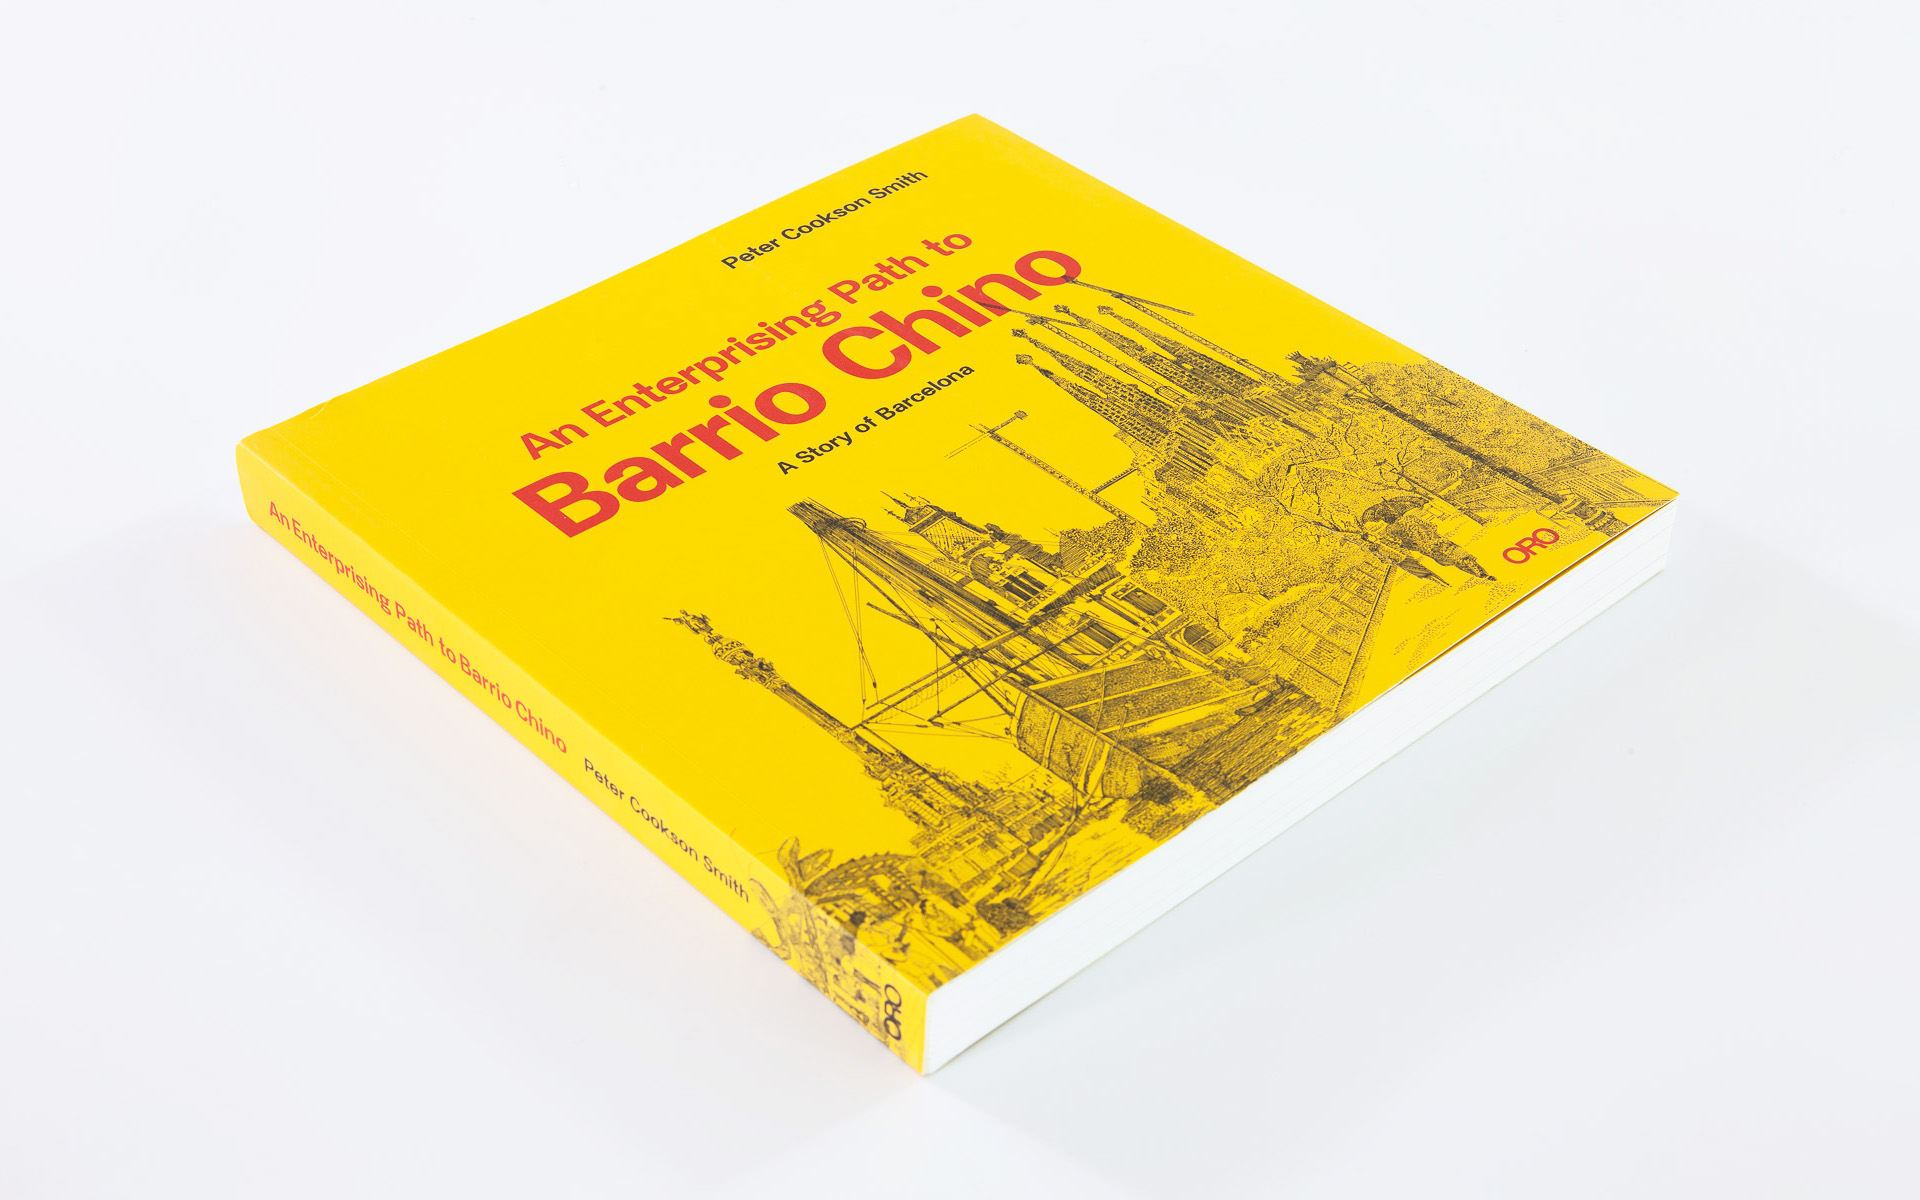 An Enterprising Path to Barrio Chino. Book cover, design by Pablo Mandel.